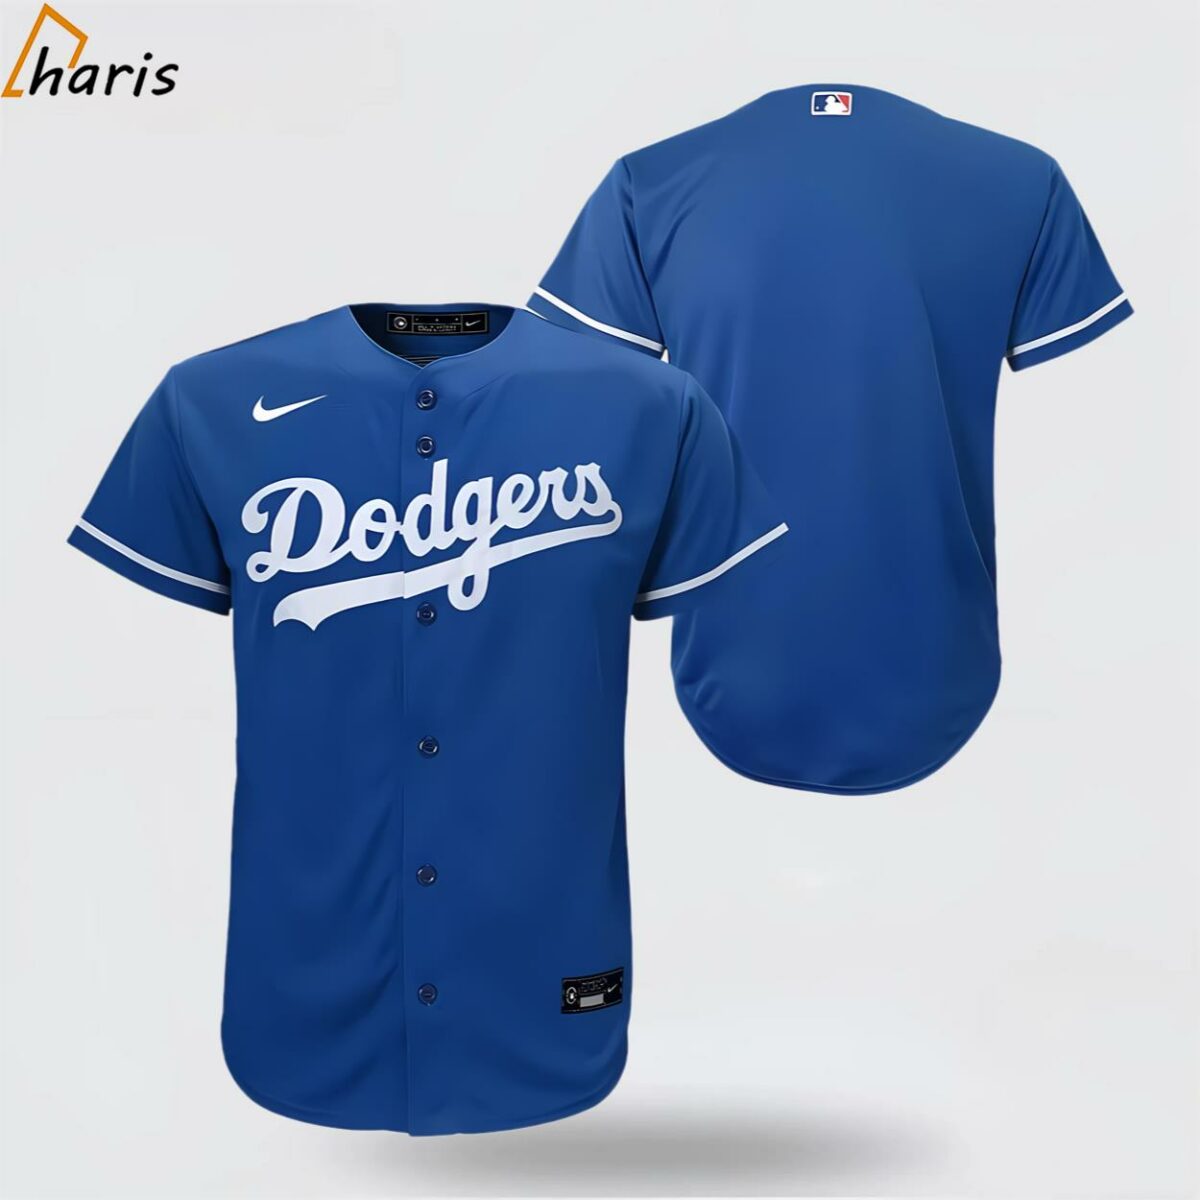 Los Angeles Dodgers Nike Official Replica Alternate Jersey Bright Royal 1 jersey